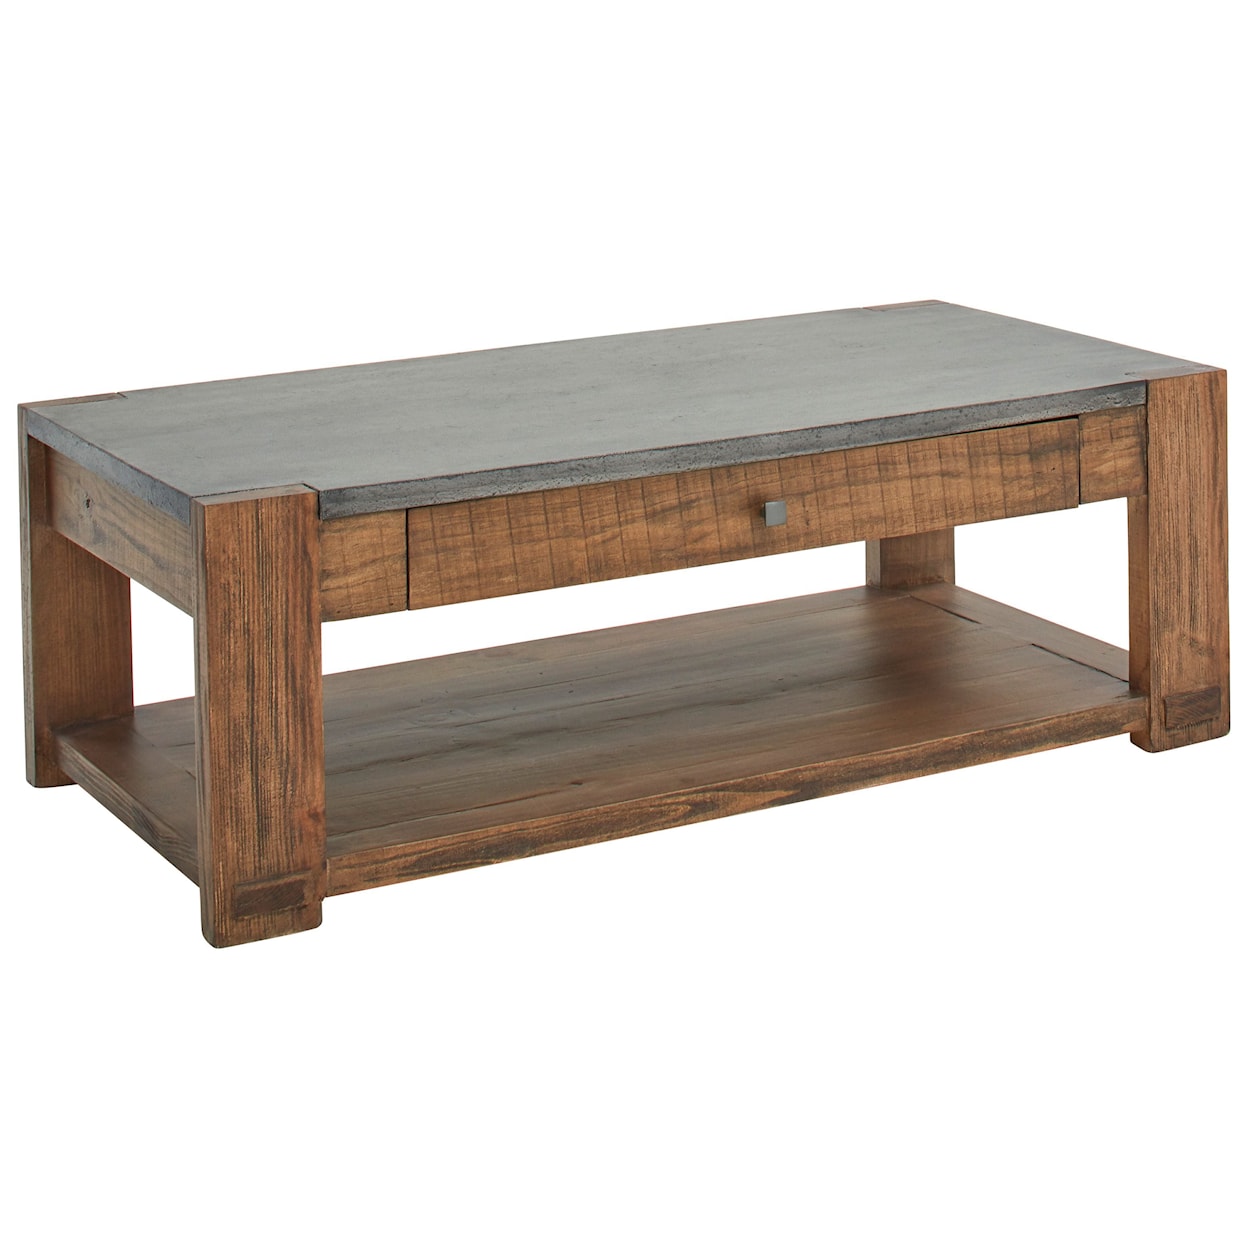 Aspenhome Harlow 1-Drawer Cocktail Table